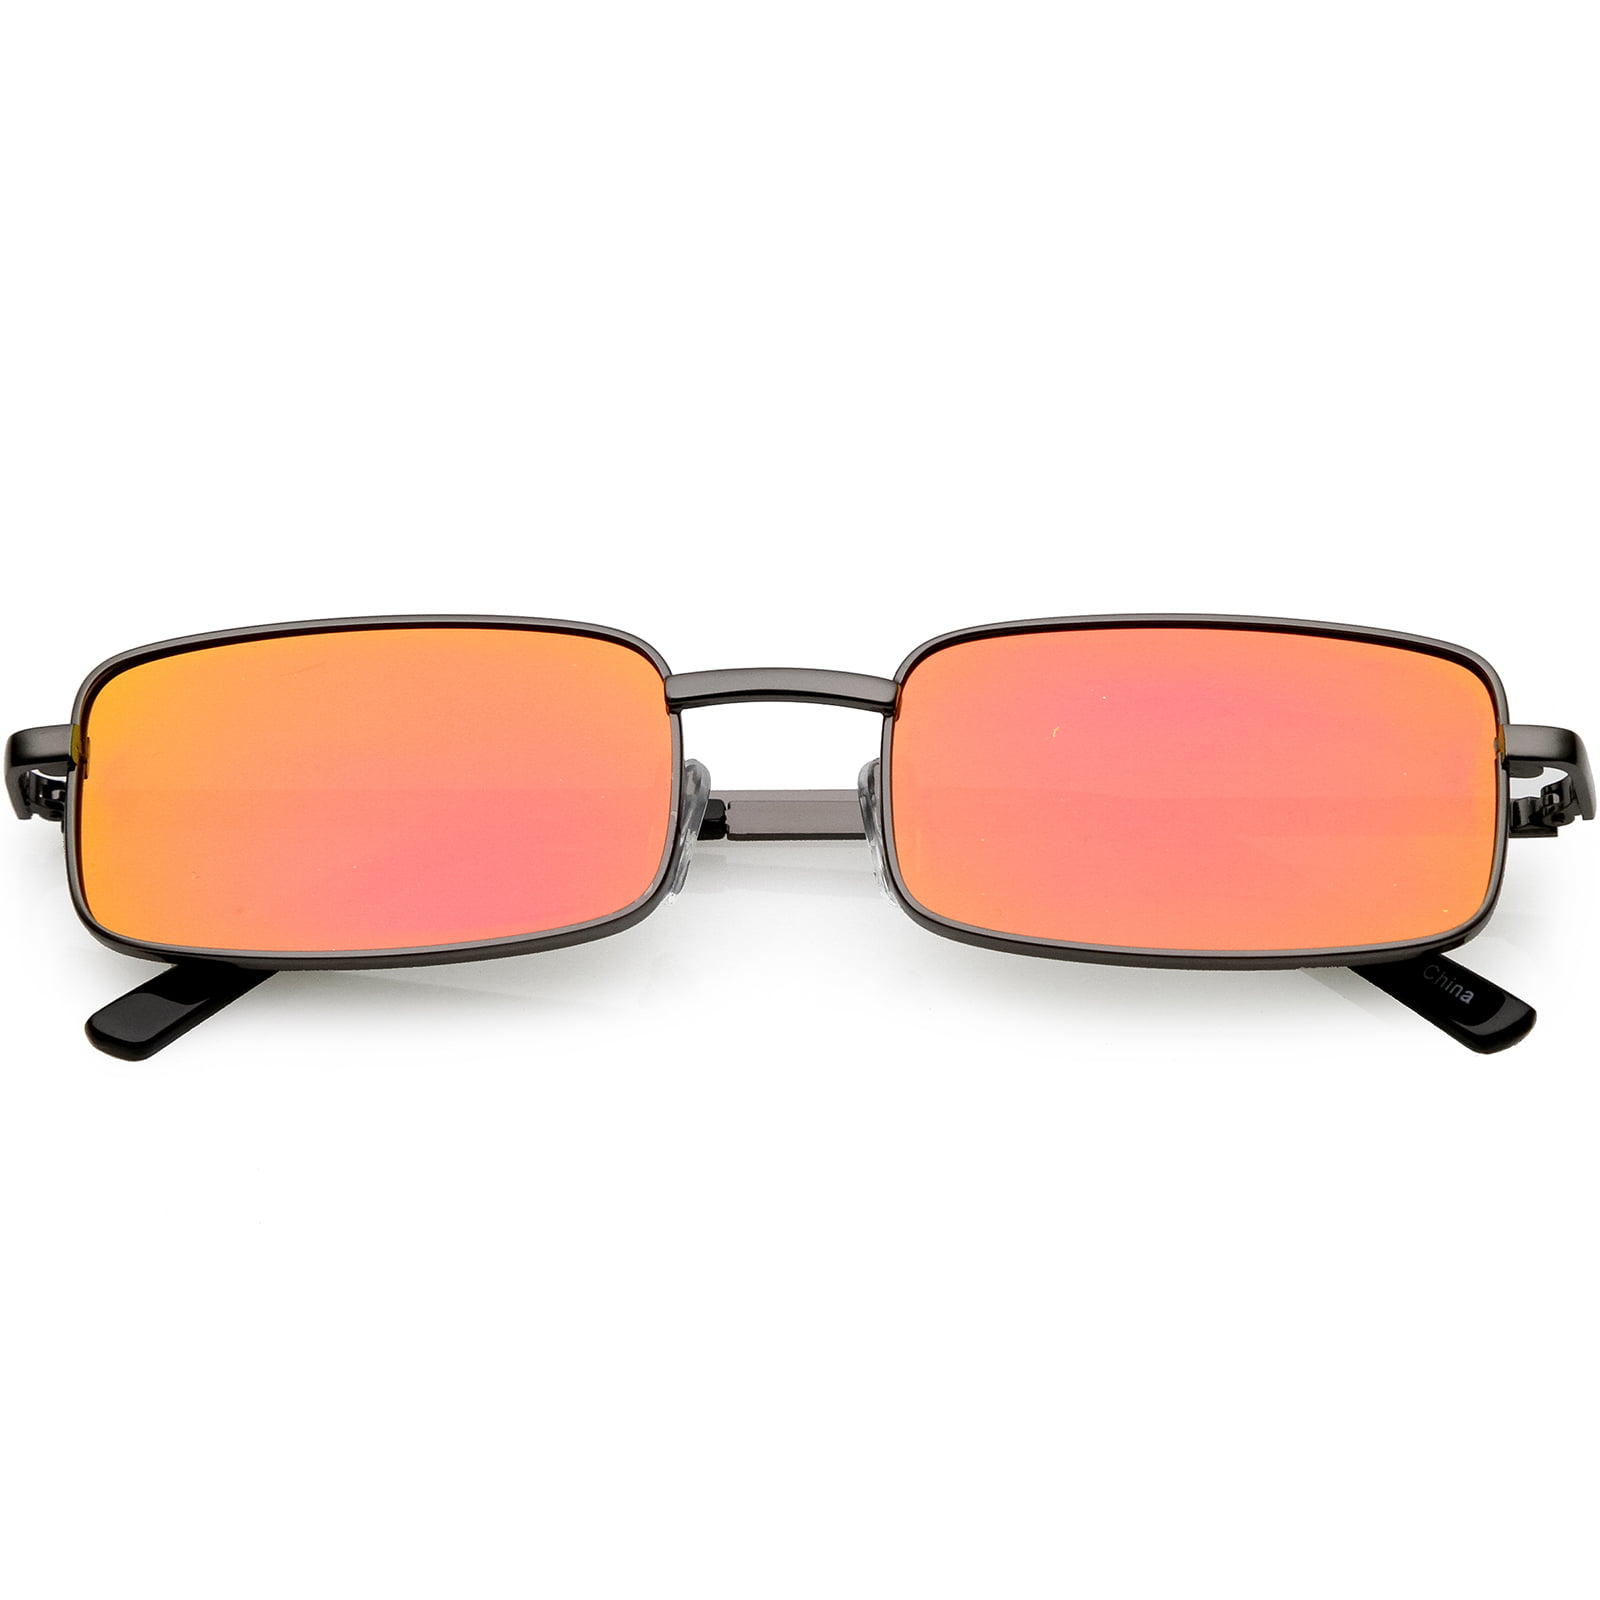 Metal Frame Sunglasses Color Lens With Spring Hinges Small Rectangular Design 